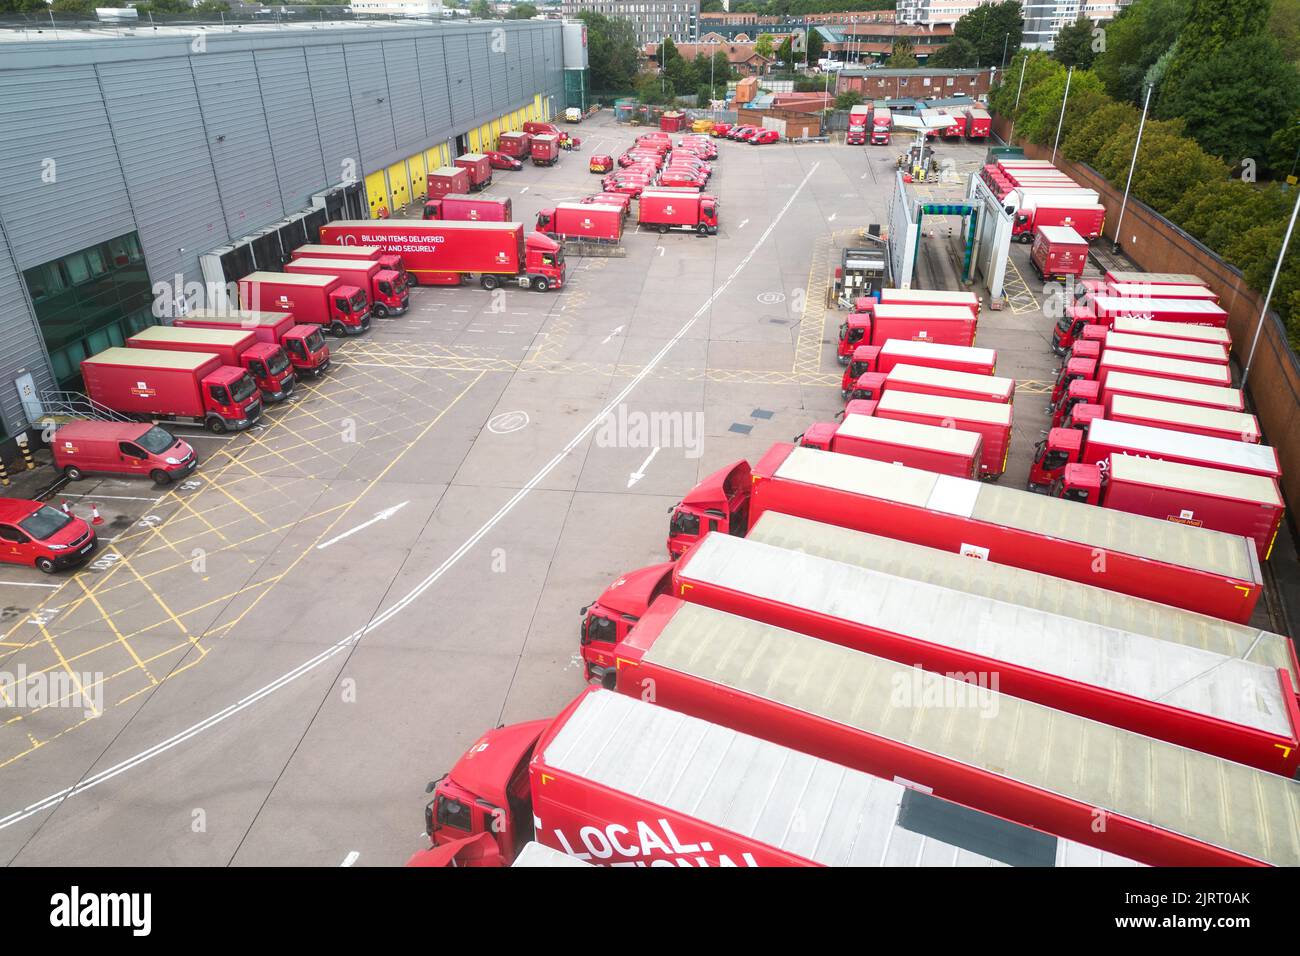 St Stephens Street, Birmingham August 26th 2022 - Birmingham's Mail Centre on St Stephens Street in the Newtown area of the city is lined with unused lorries, trucks and vans as over 100,000 employees strike over pay disputes. A small amount of staff were seen sorting mail from one van and agency drivers and staff from Whistl arrived with important deliveries. Credit: Scott CM/Alamy Live News Stock Photo